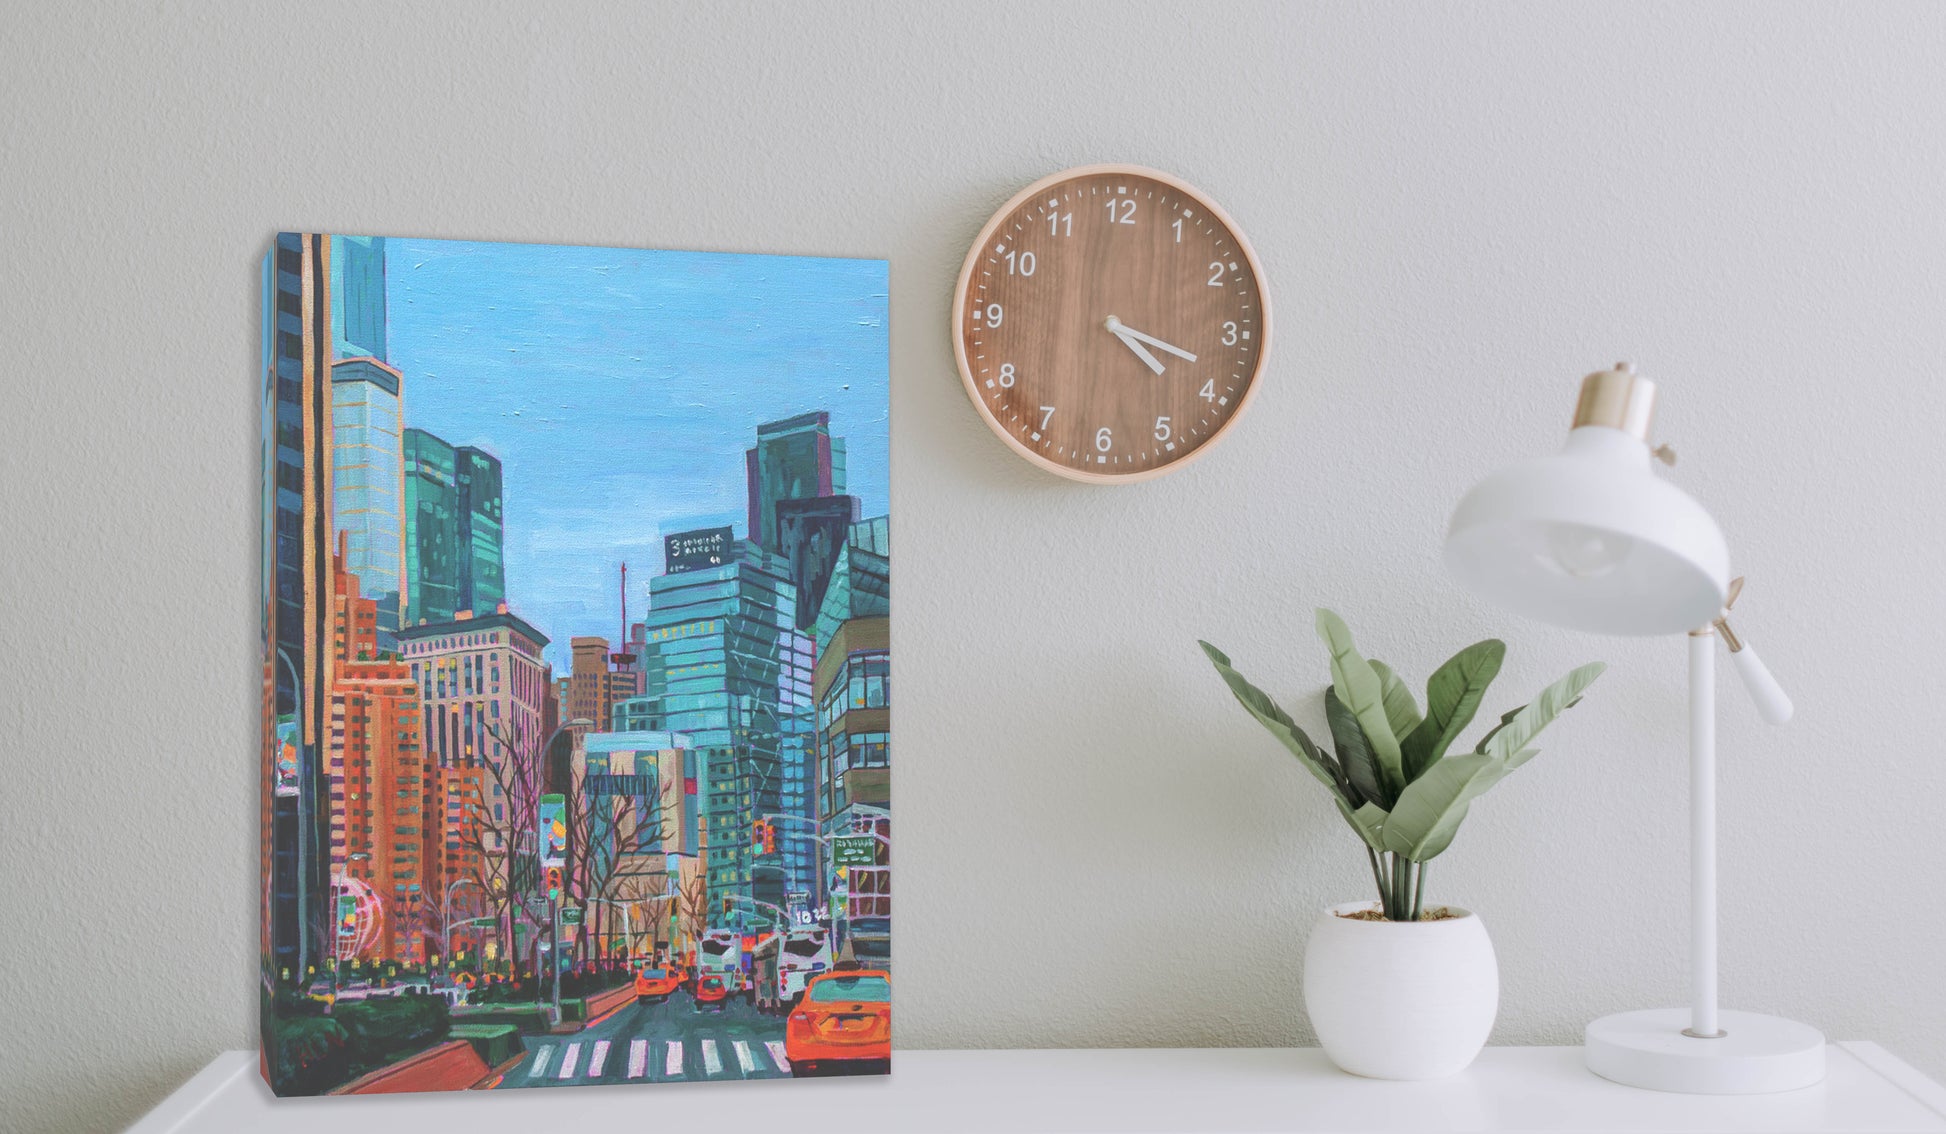 New York City painting on dresser with clock and lamp